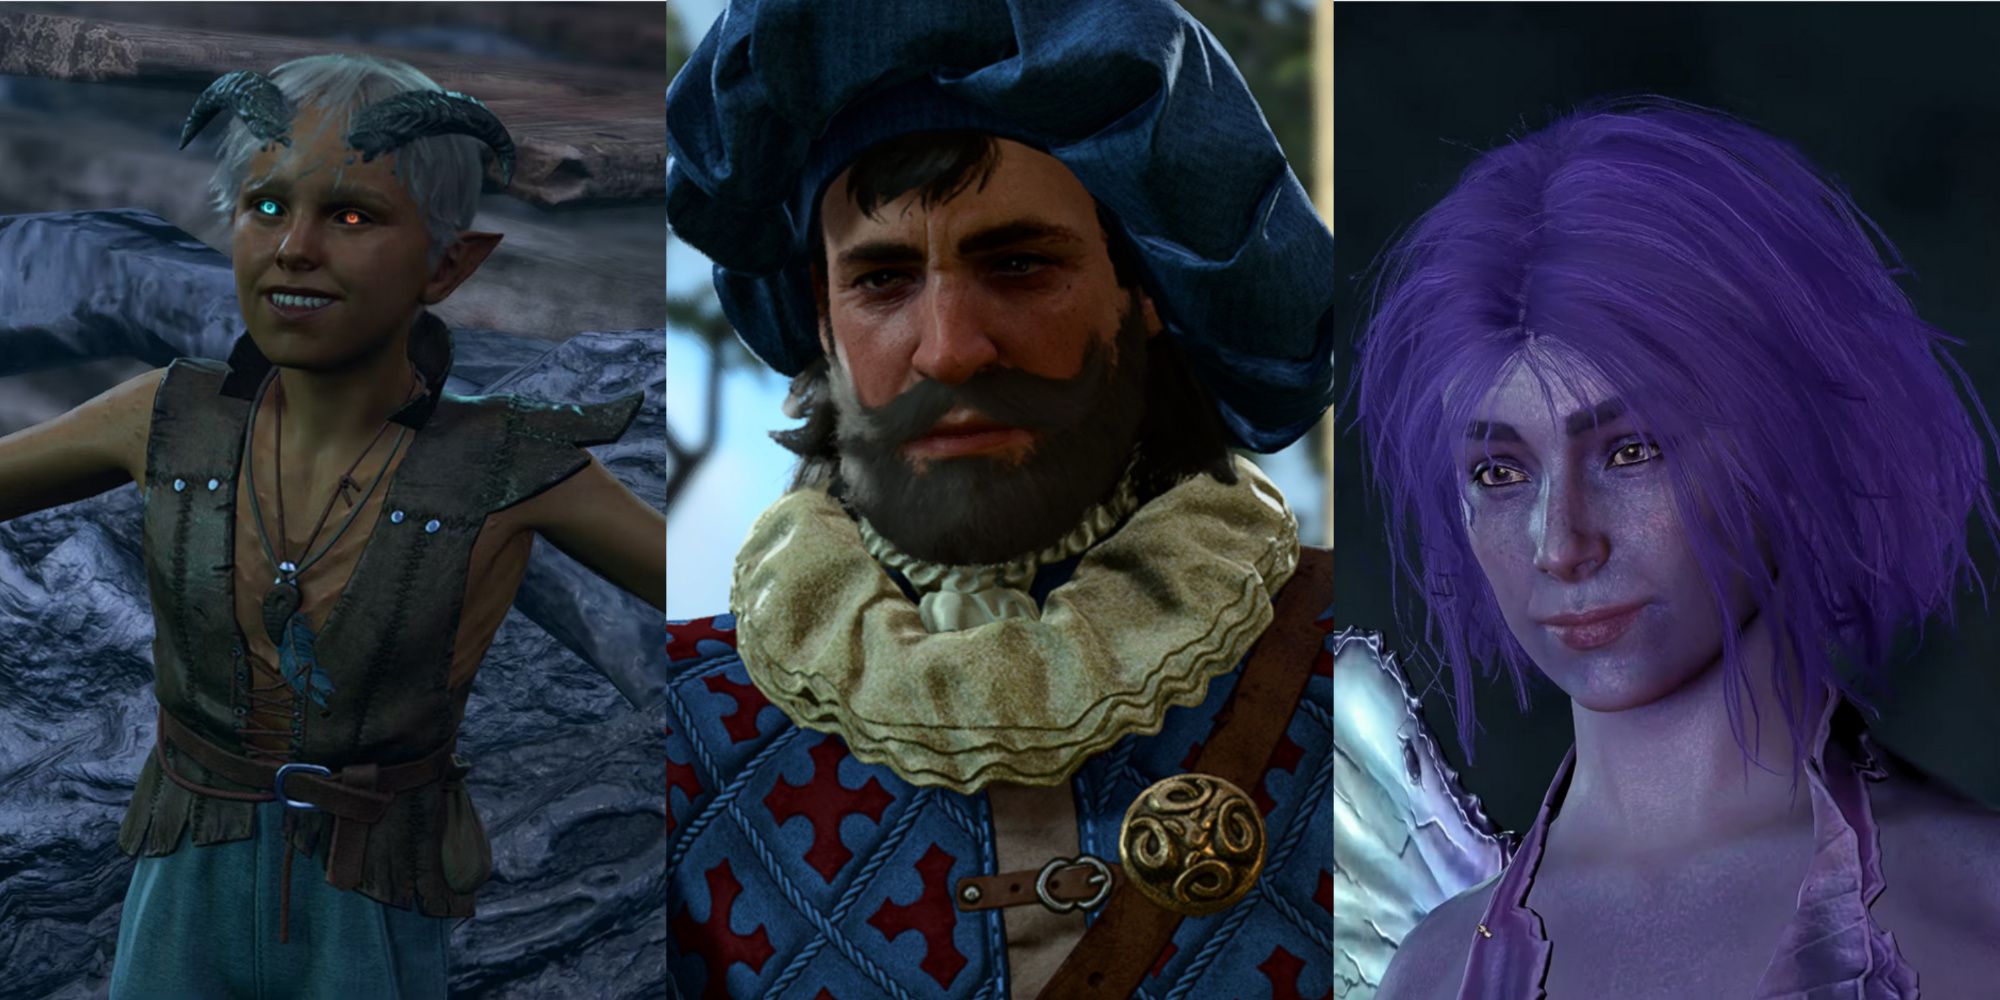 Baldur's Gate 3, Oliver The Fey Child, Volo The Bard, And Dolly Thrice The Pixie